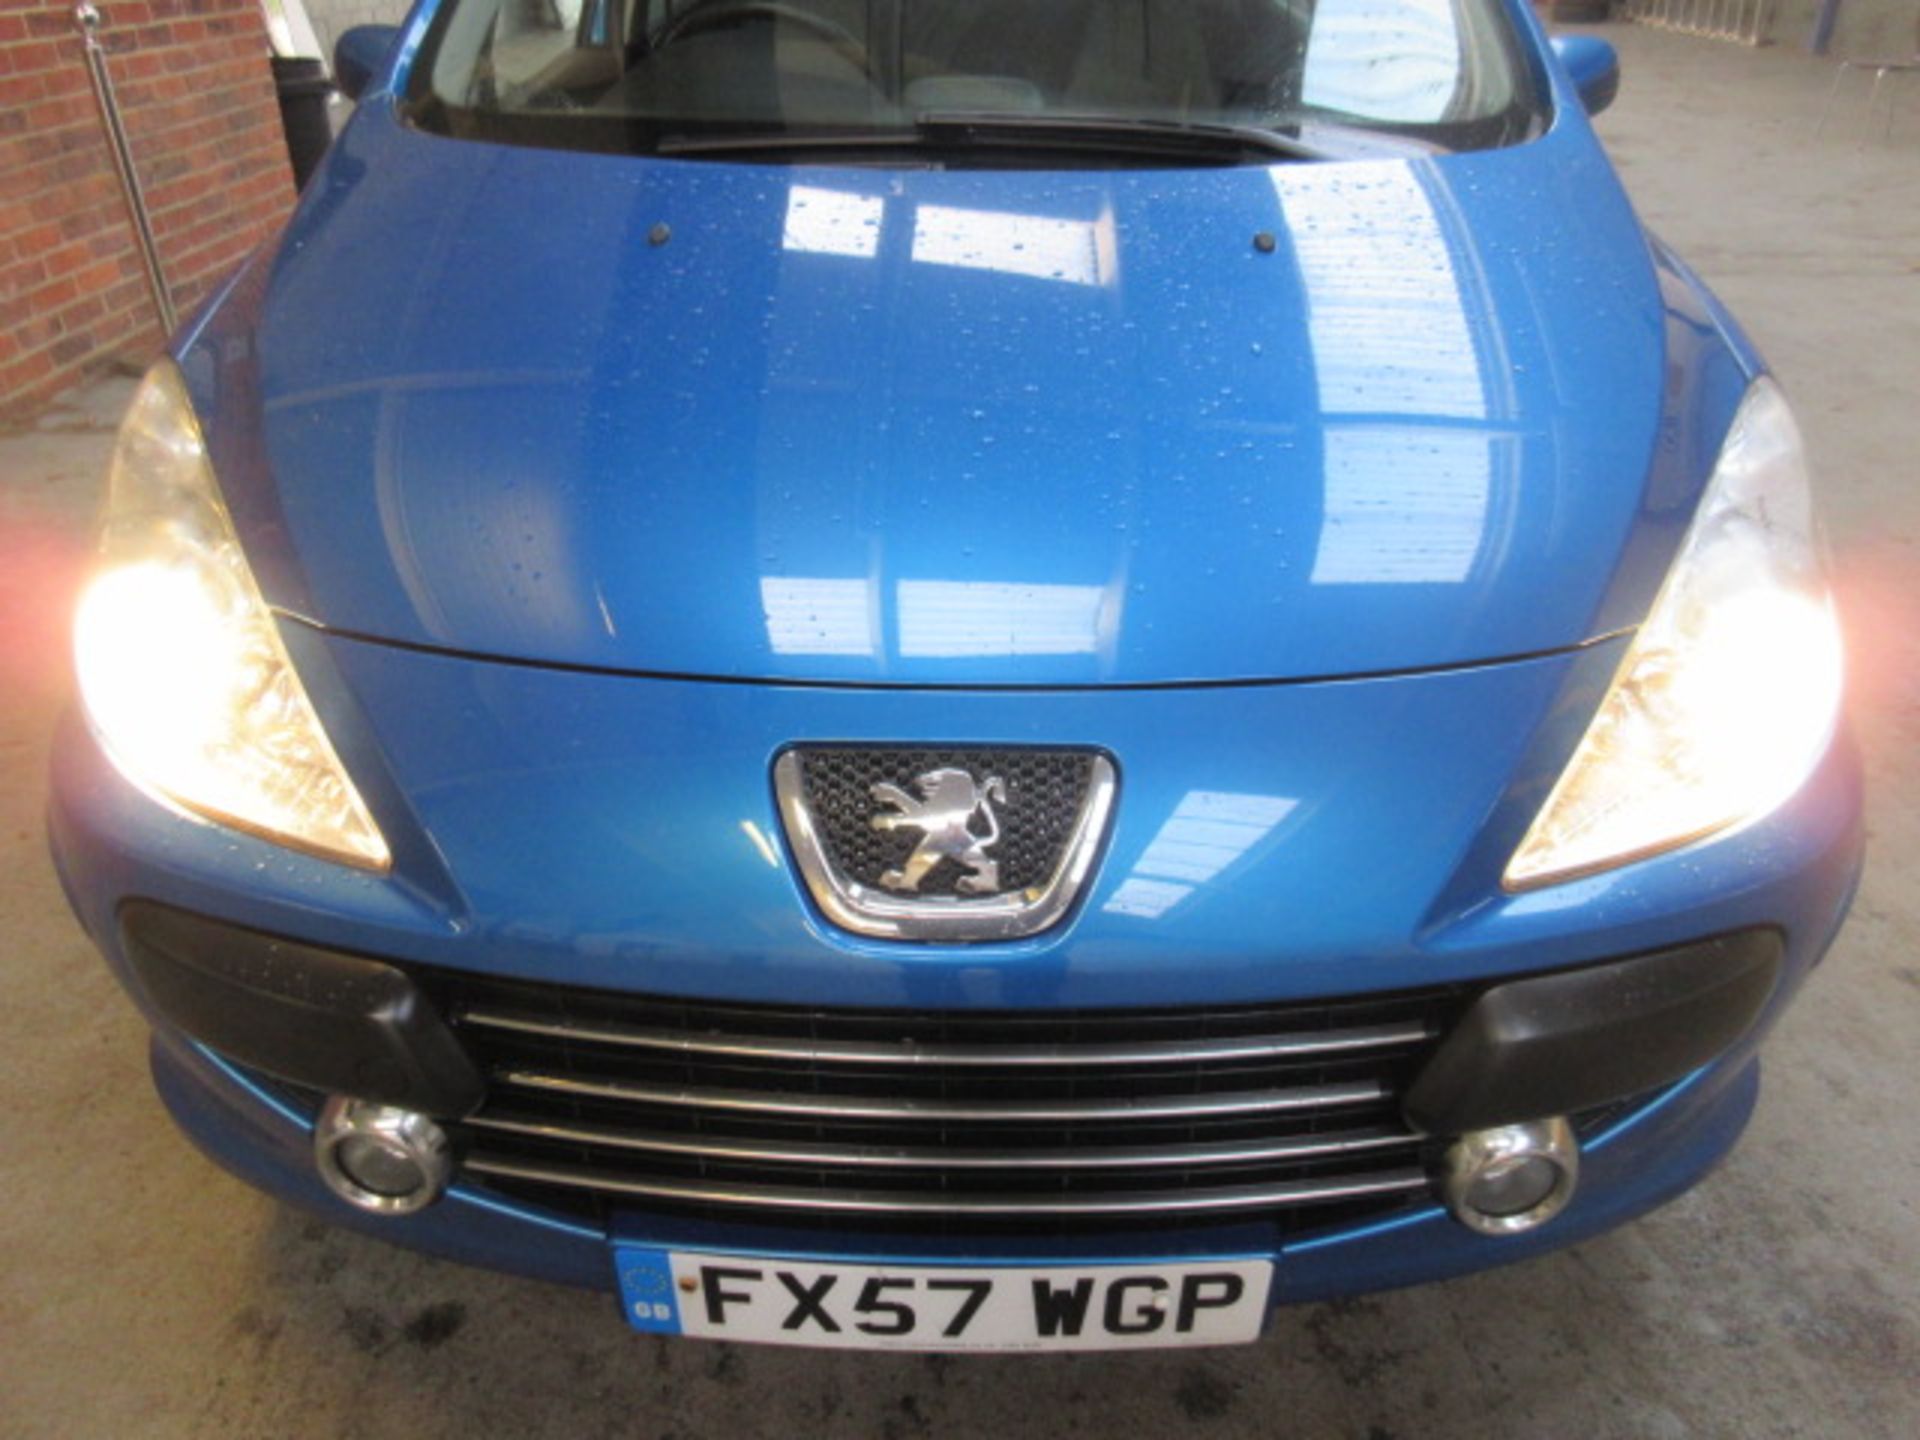 57 07 Peugeot 307 S - Image 4 of 17